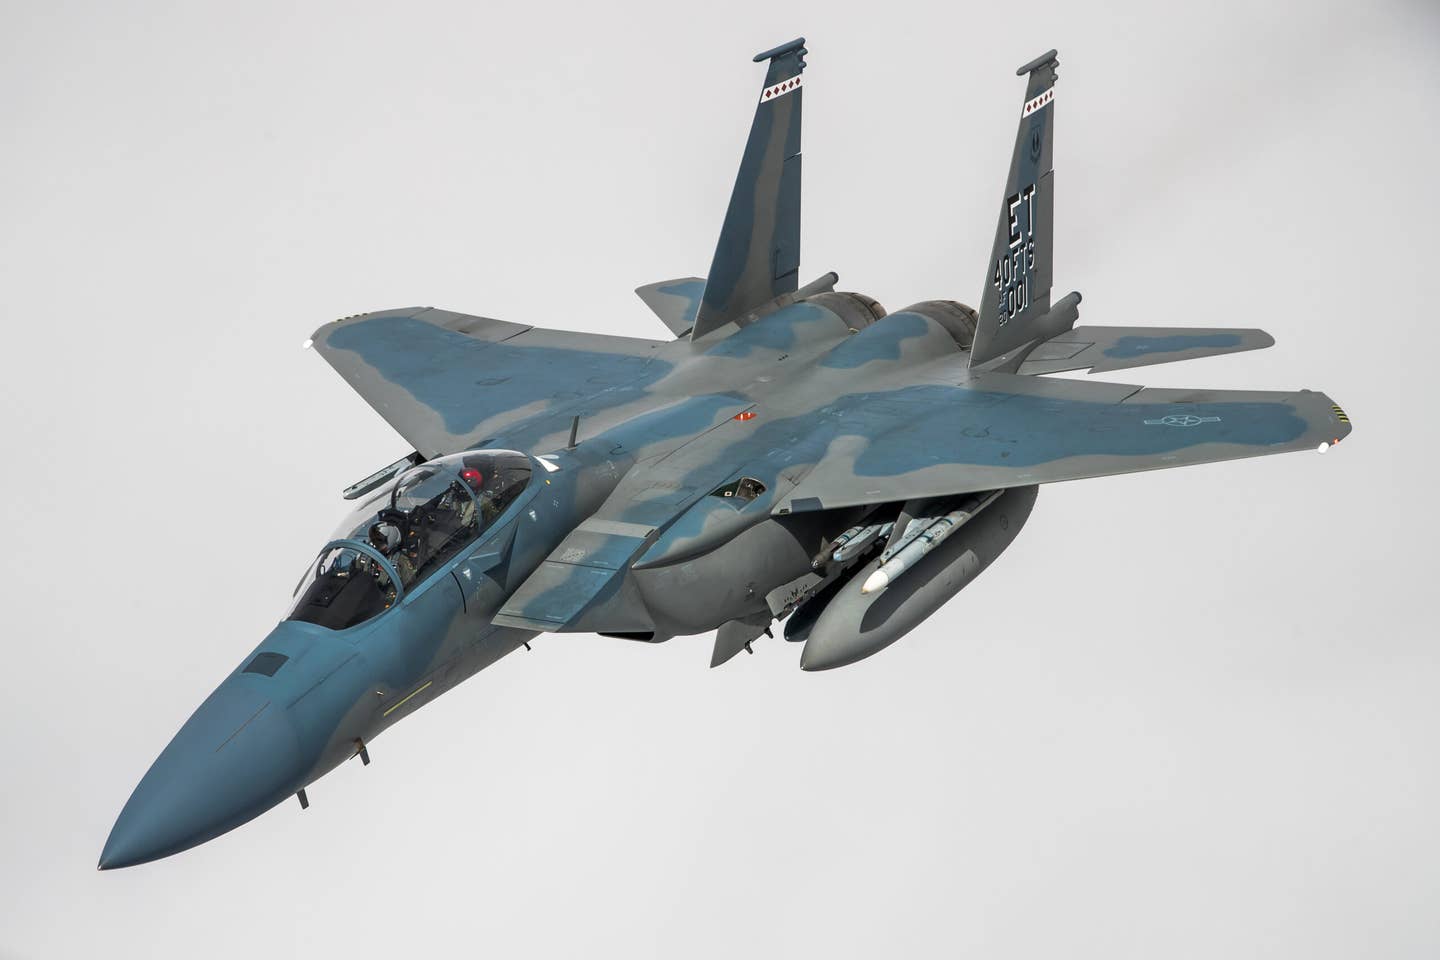 An F-15EX from the 40th Flight Test Squadron, 96th Test Wing out of Eglin Air Force Base, Florida, during an aerial refueling operation above the skies of Northern California, May 14, 2021. <em>Air Force photo by Ethan Wagner</em>